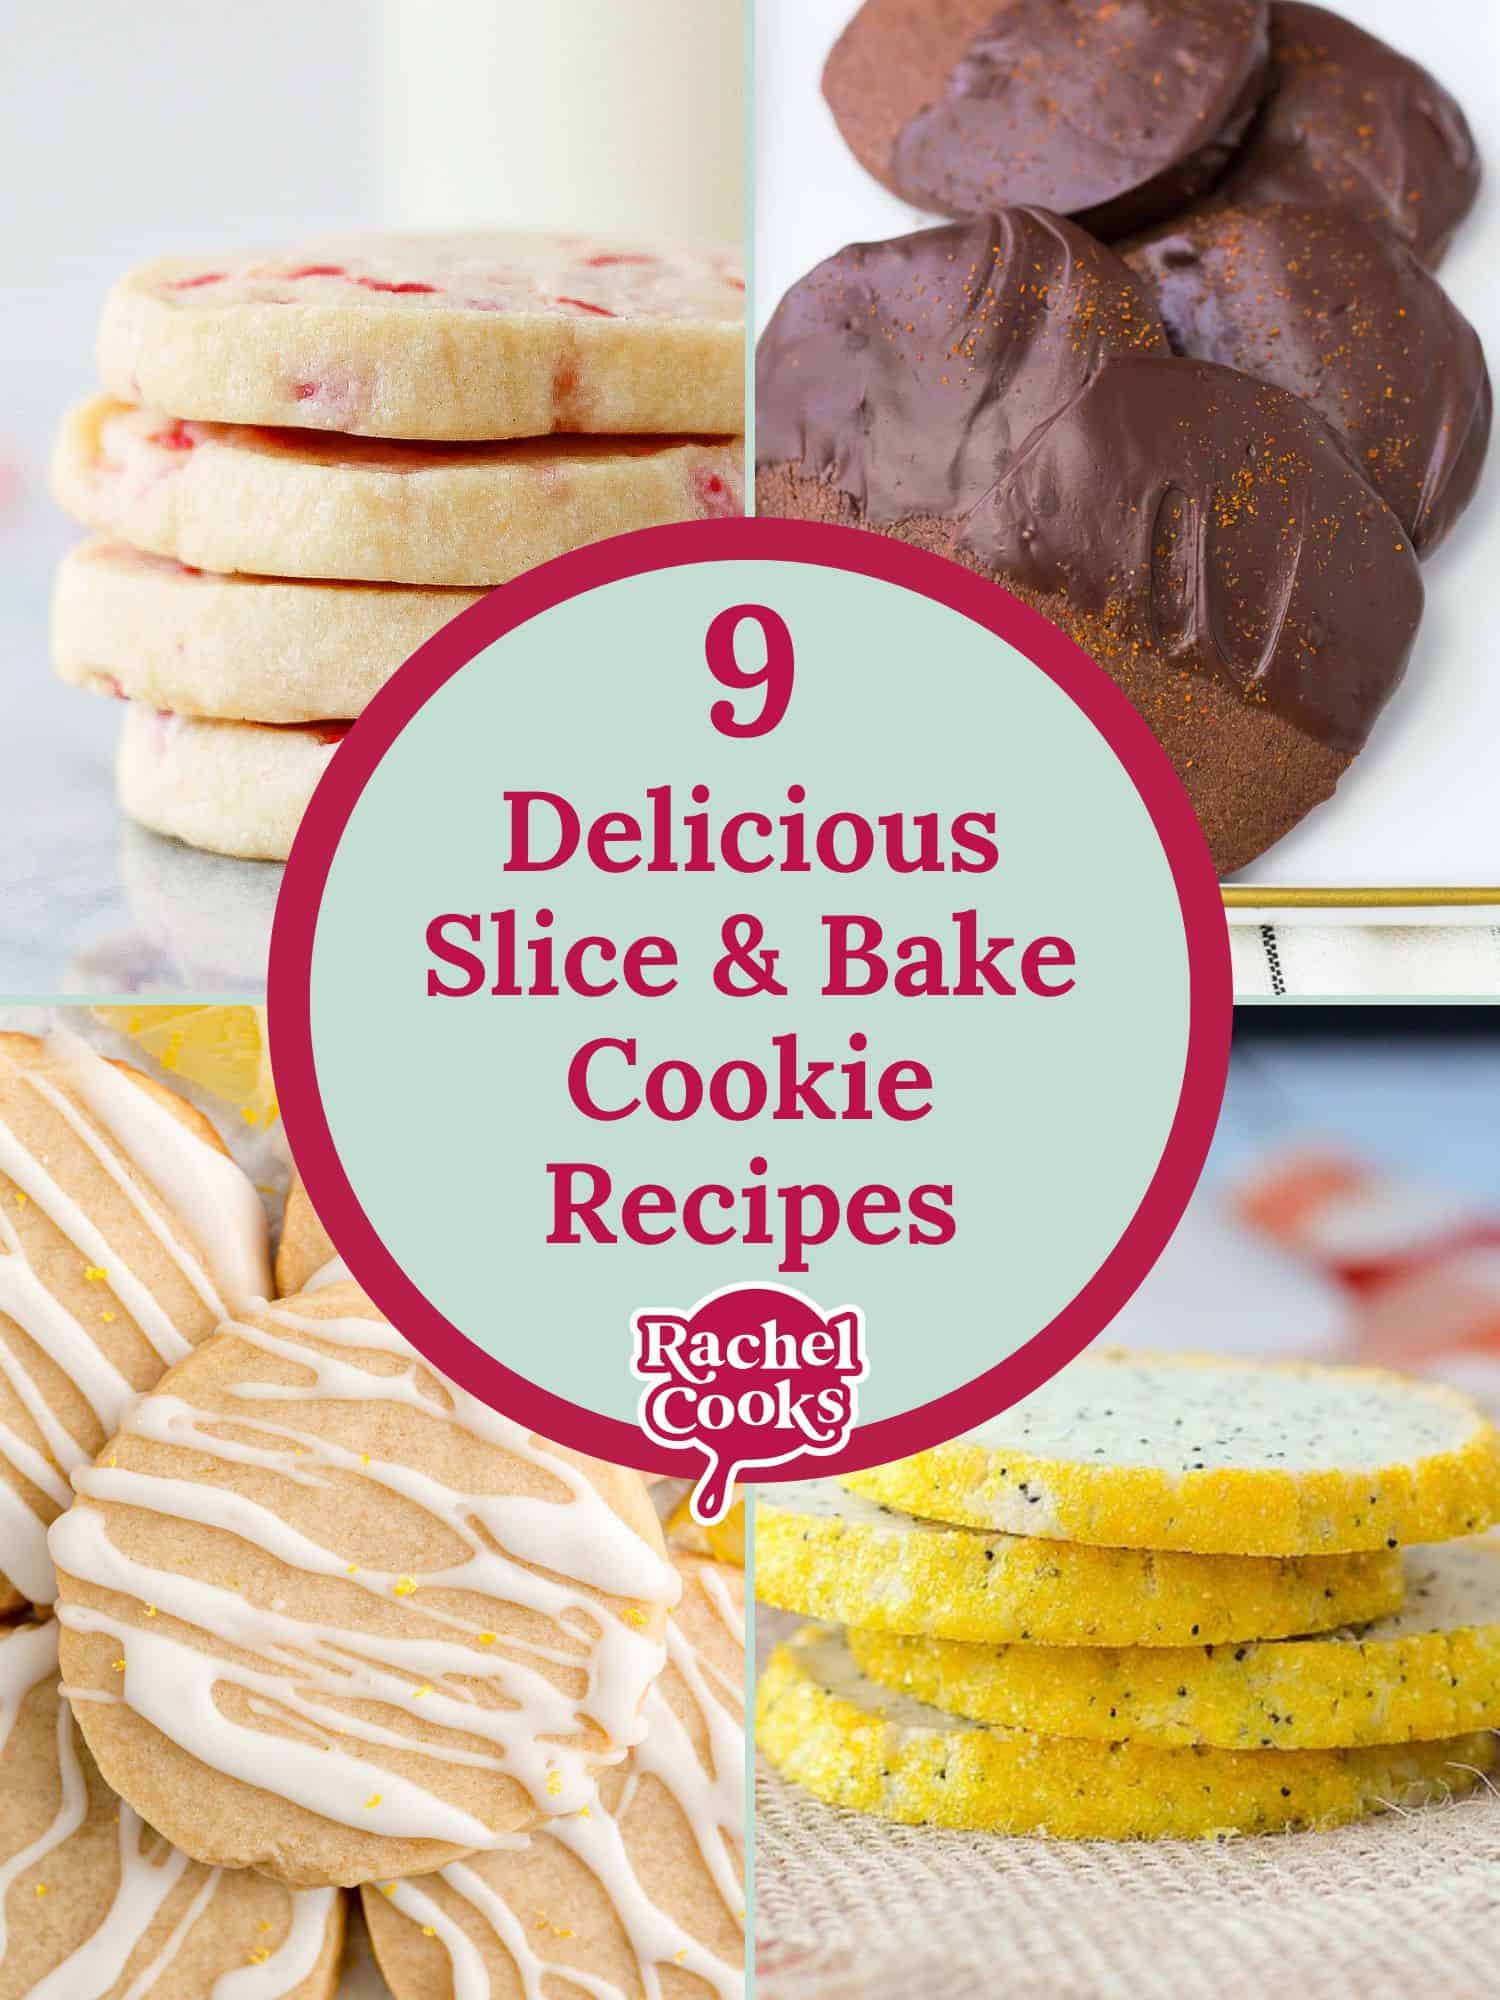 Slice and bake cookie recipe list graphic with text and photos.